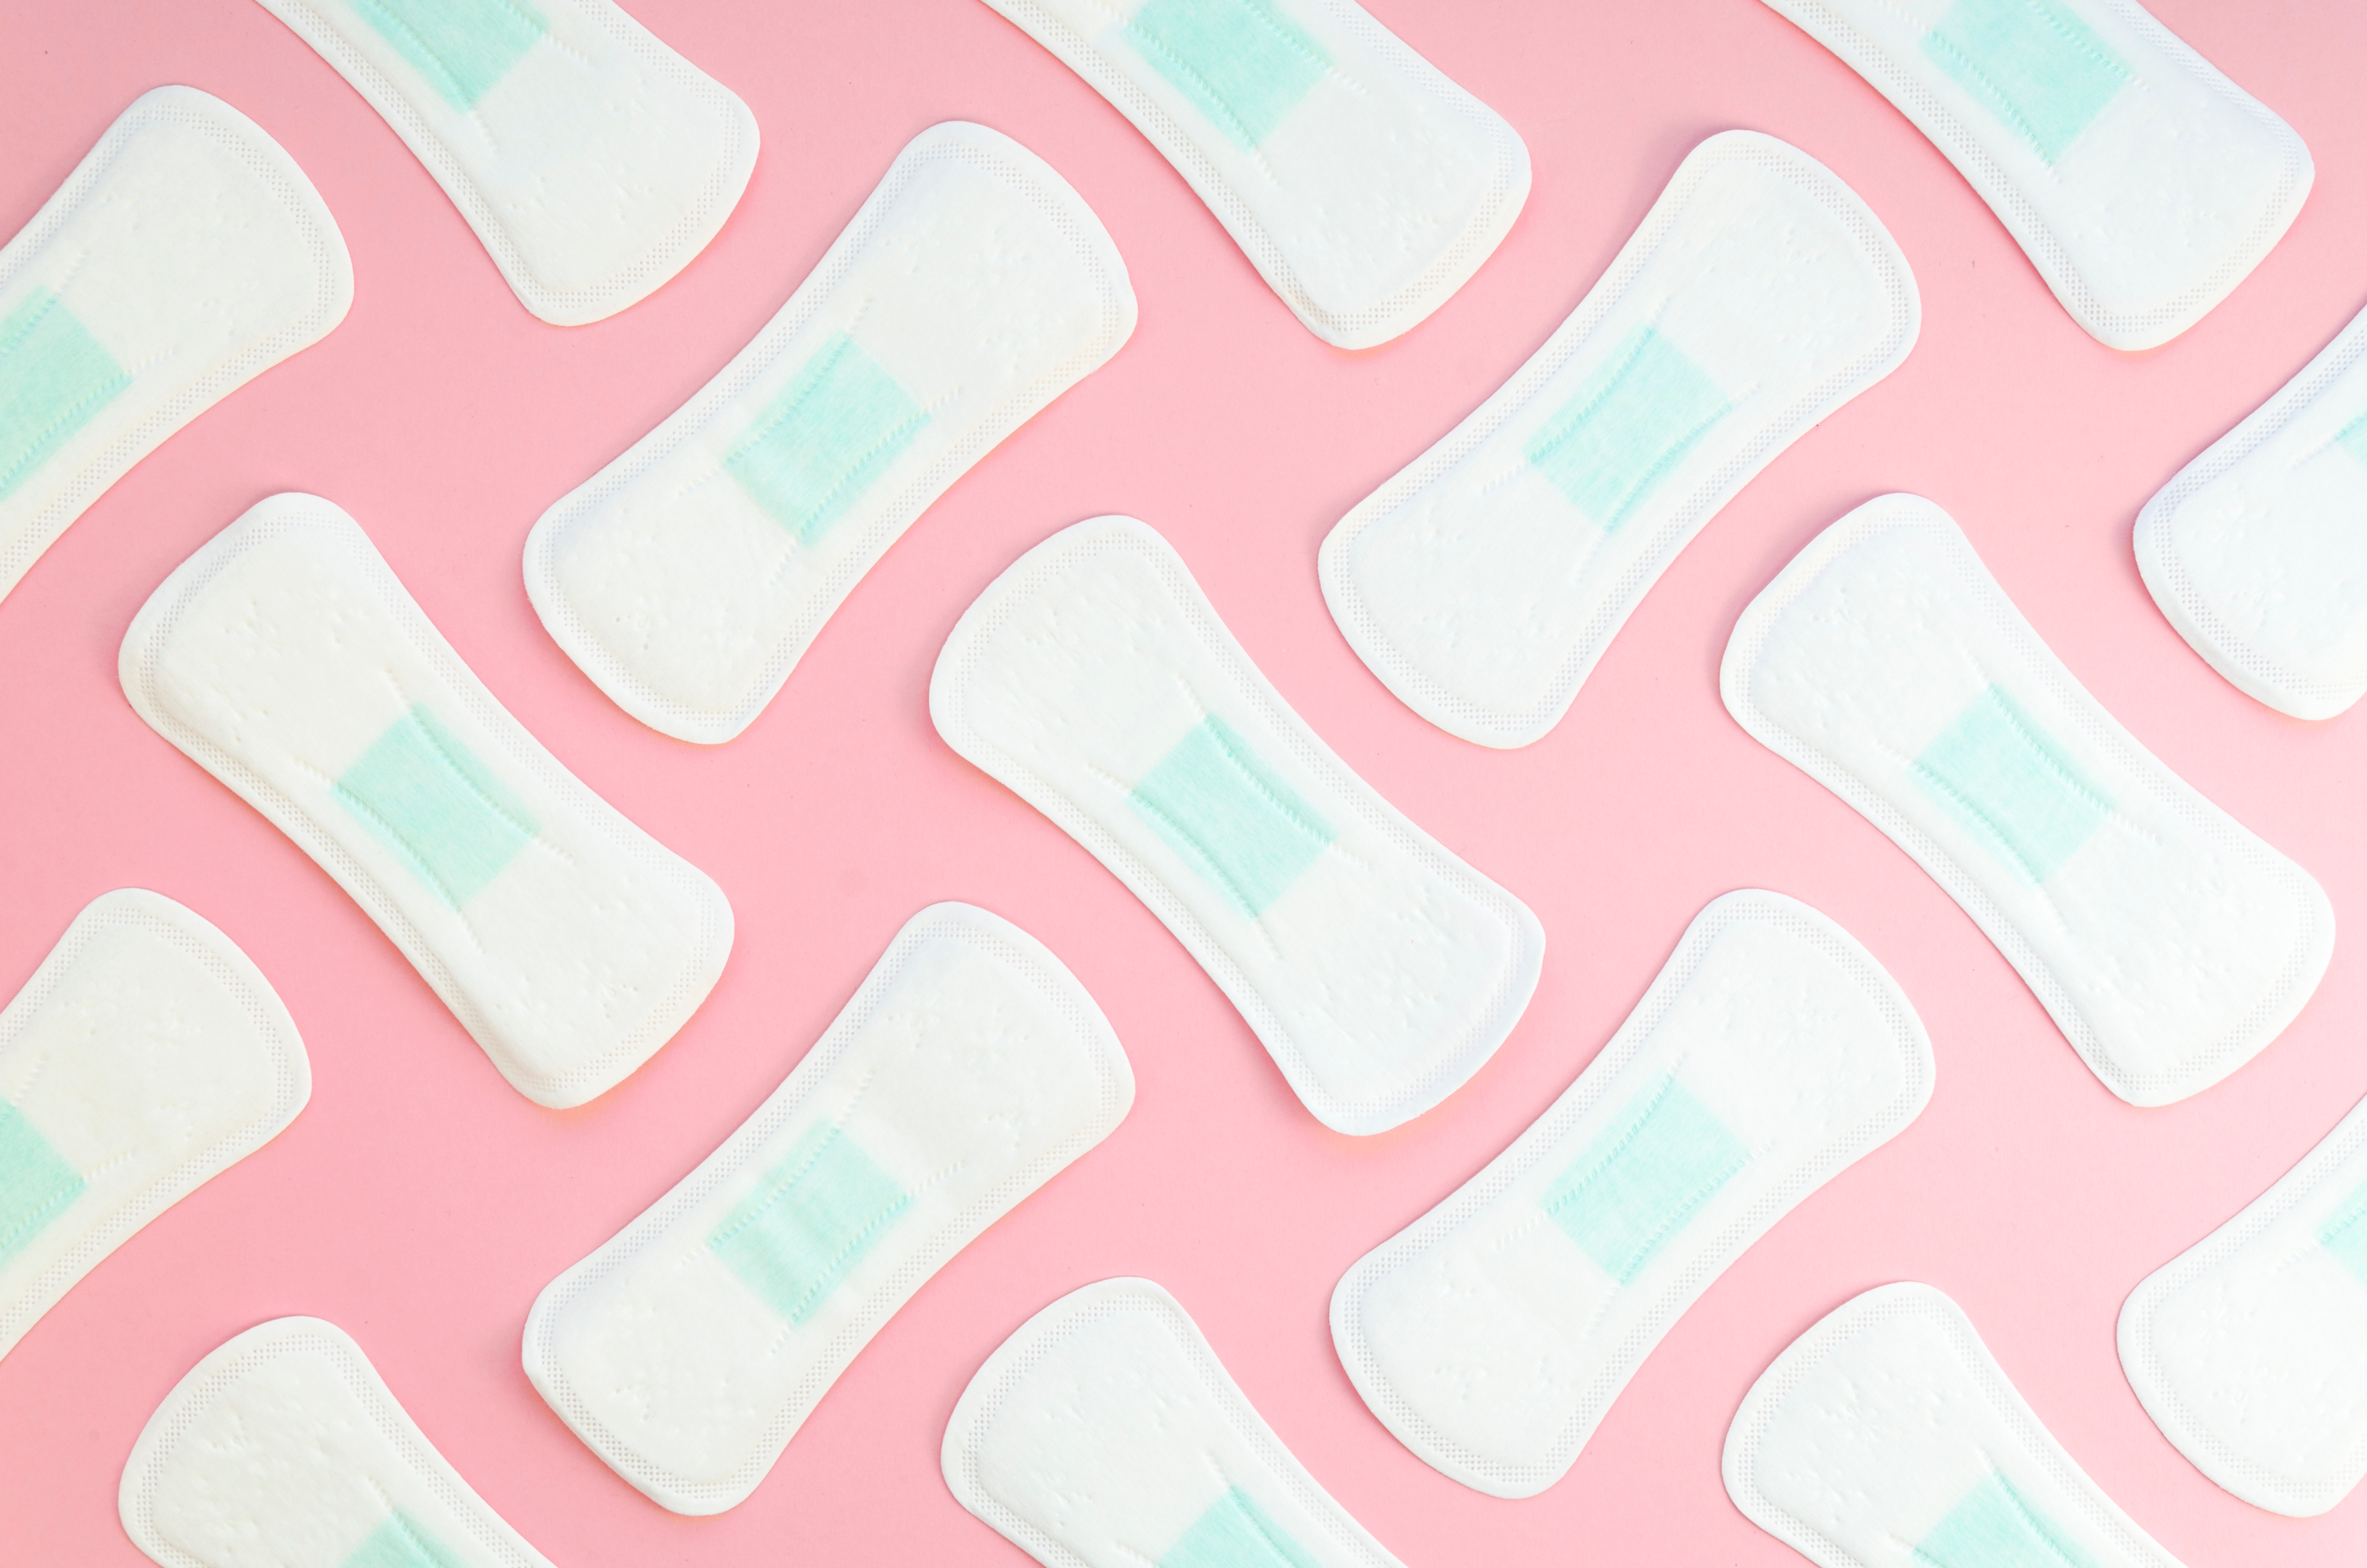                   It is better to use period pads rather than a tampon for the initial periods after delivery.